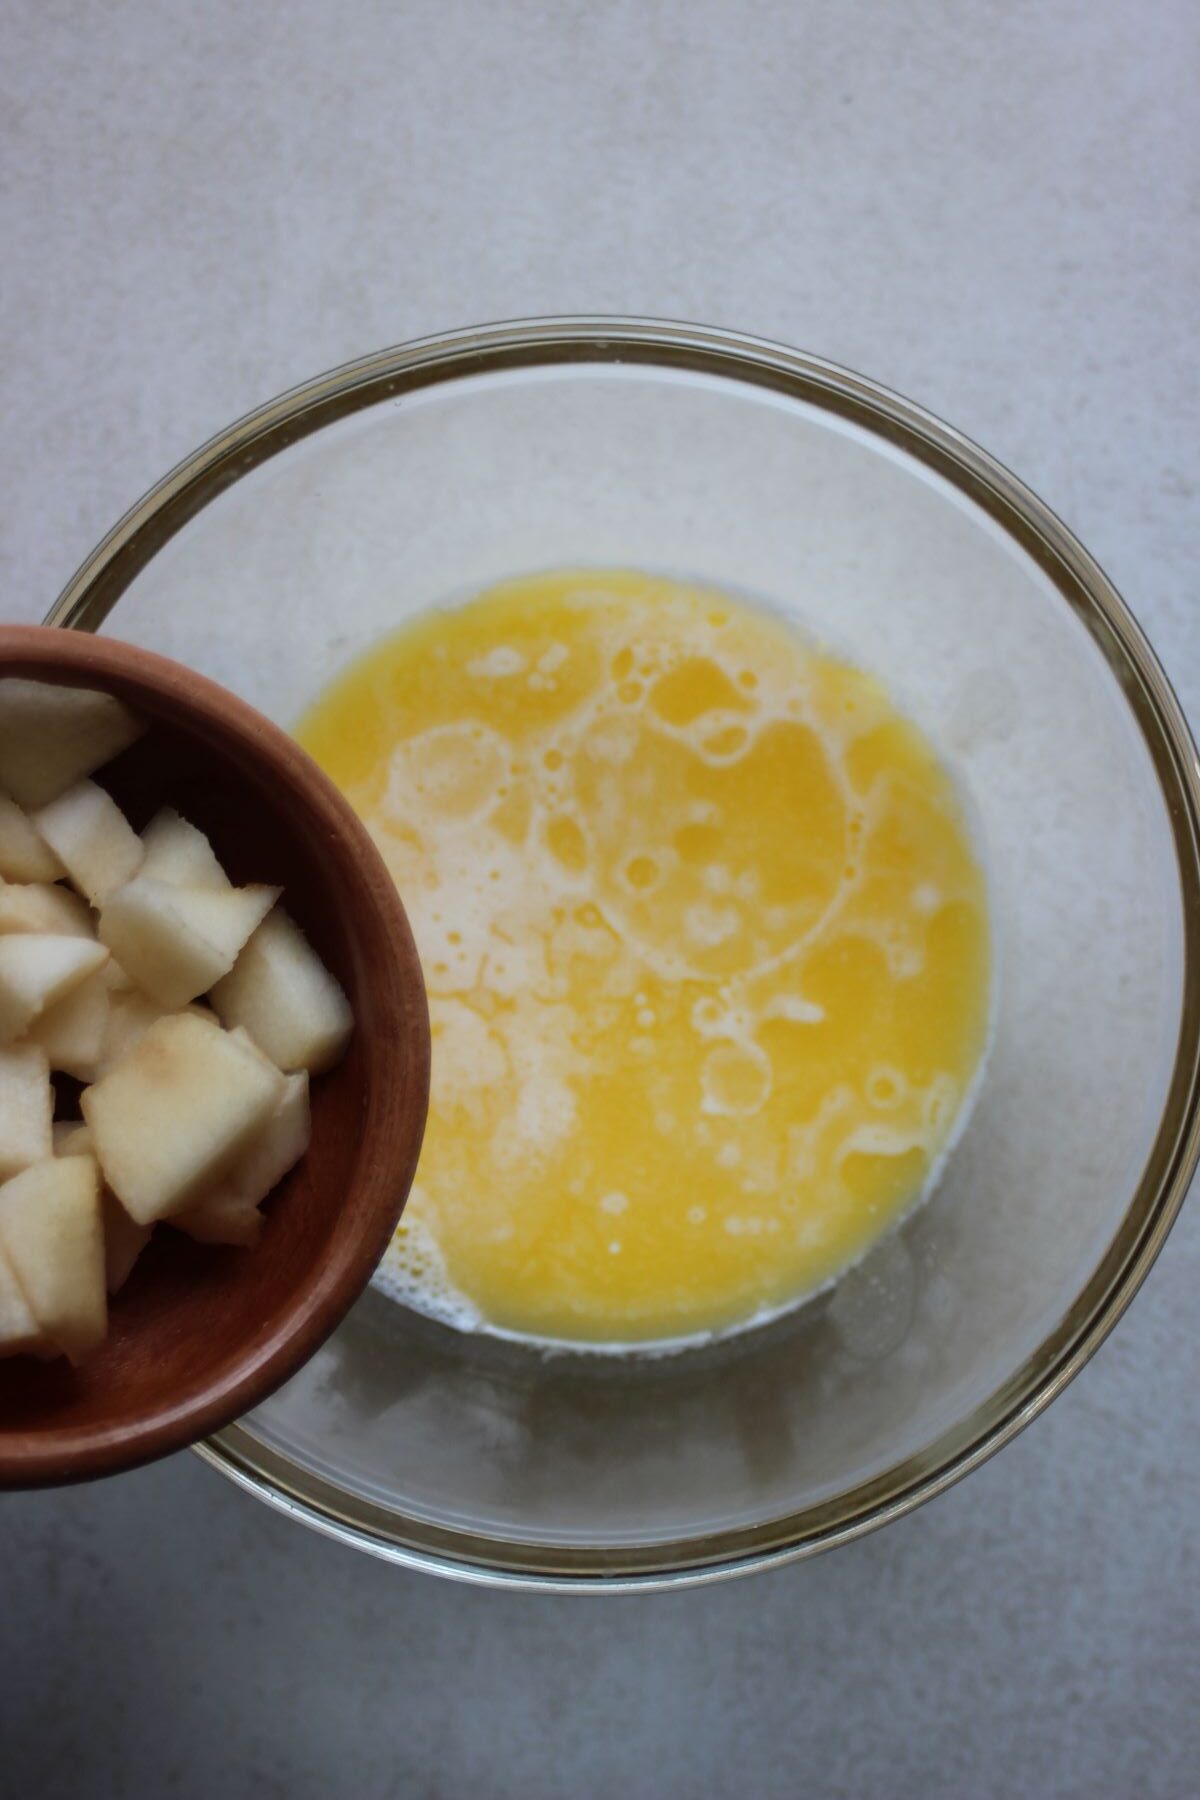 Bowl with chopped pears is about to be poured into a bowl with a yellow liquid.